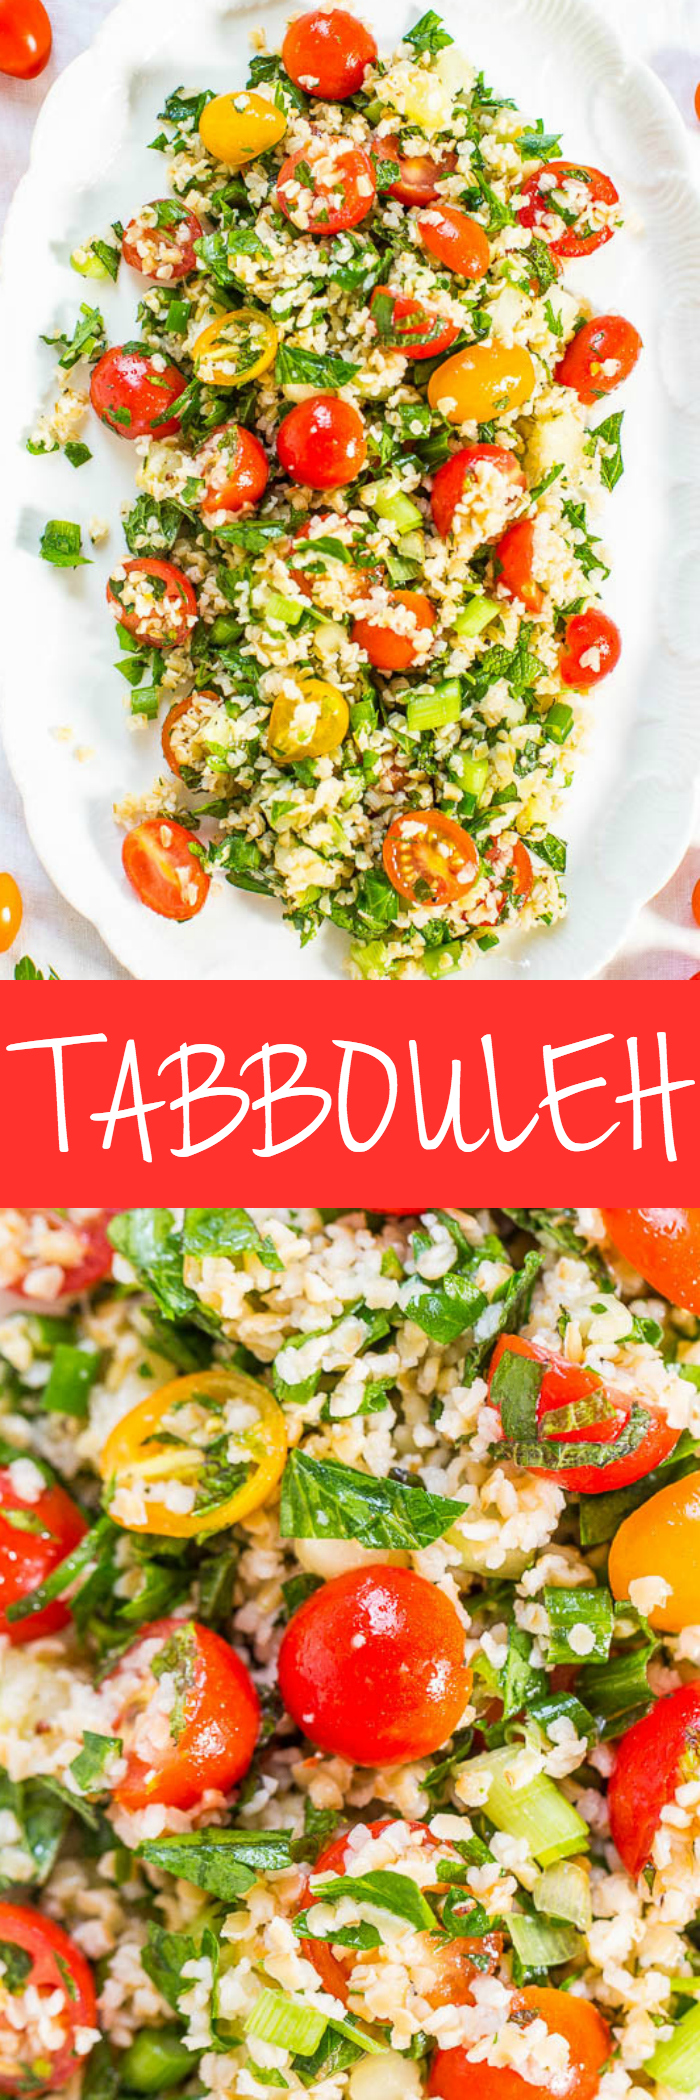 Tabbouleh - Never had it? Think couscous or quinoa mixed with vegetables, herbs, lemon and olive oil! Easy, no cooking required, healthy, and packed with so much flavor!! (Great for outdoor events because there's no mayo!)